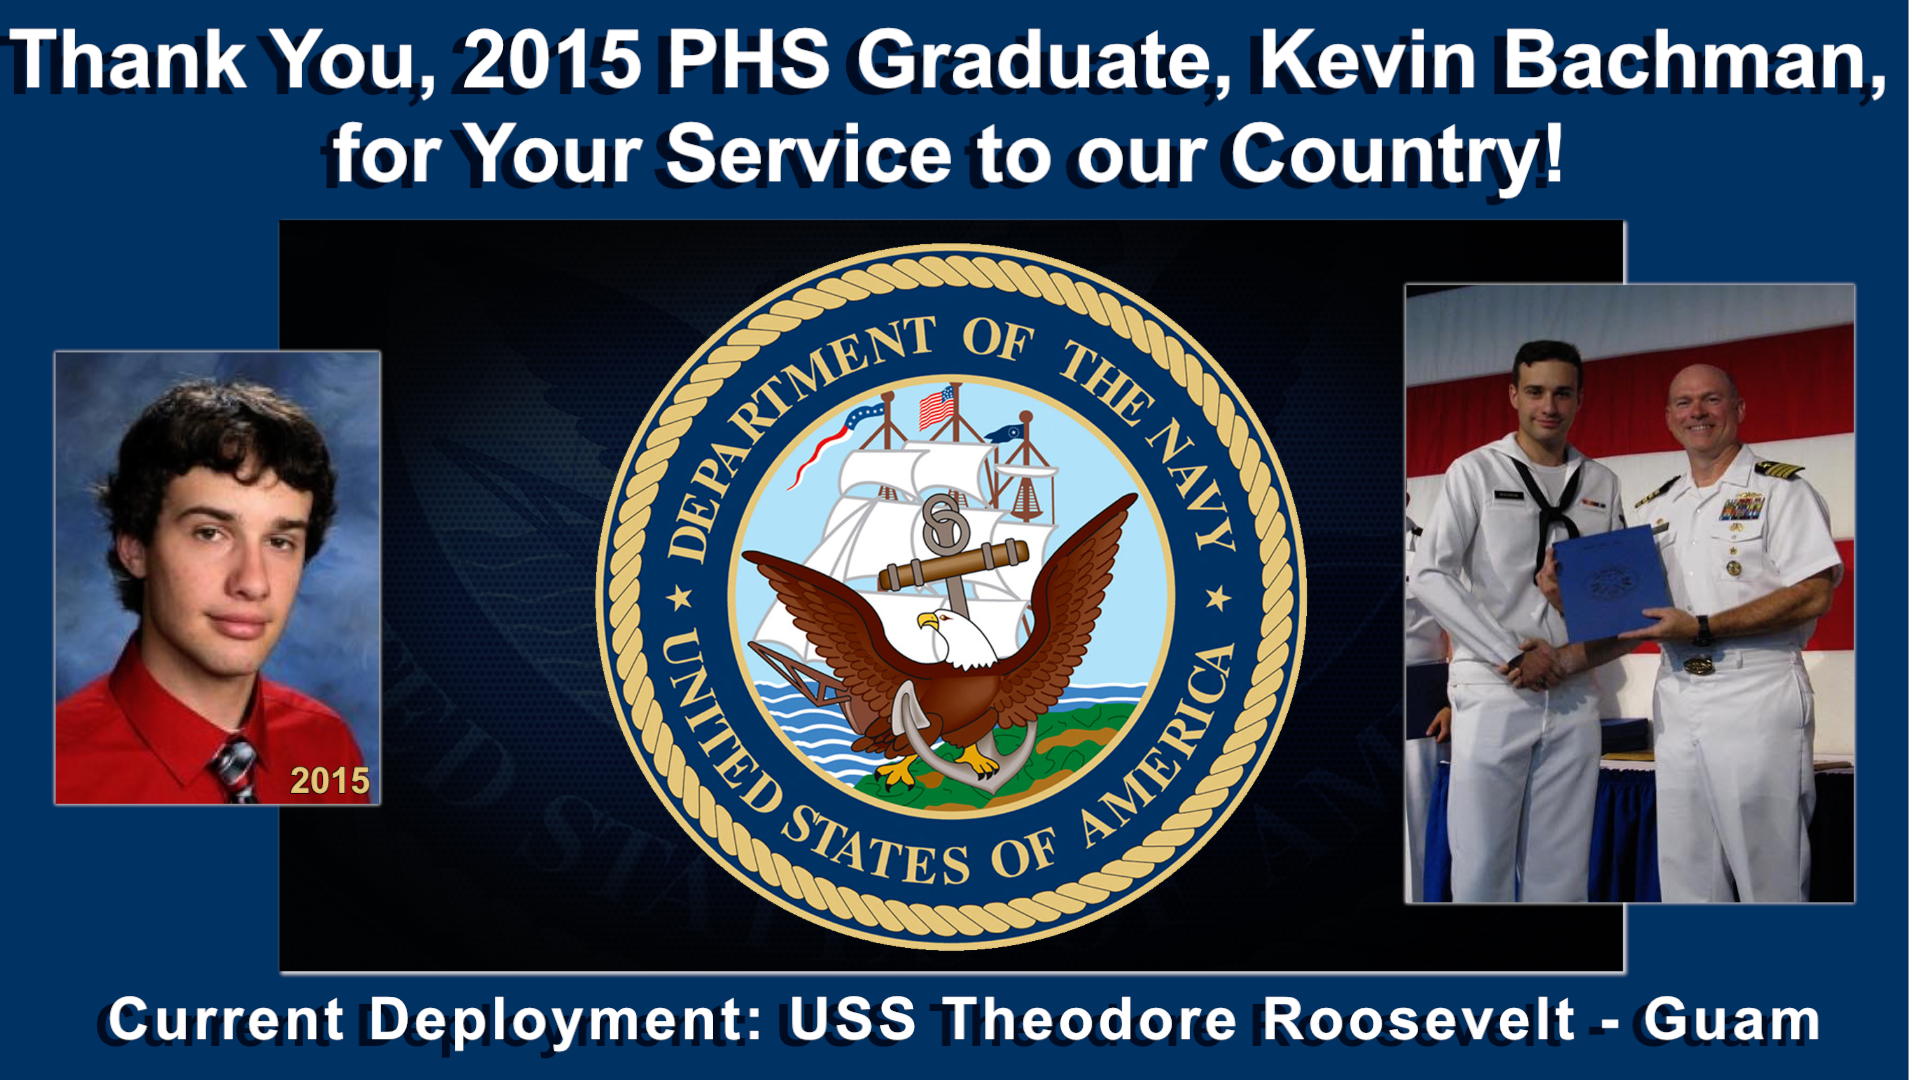 PHS 2015 Graduate Kevin Bachman serving in U.S. Navy aboard USS Theodore Roosevelt